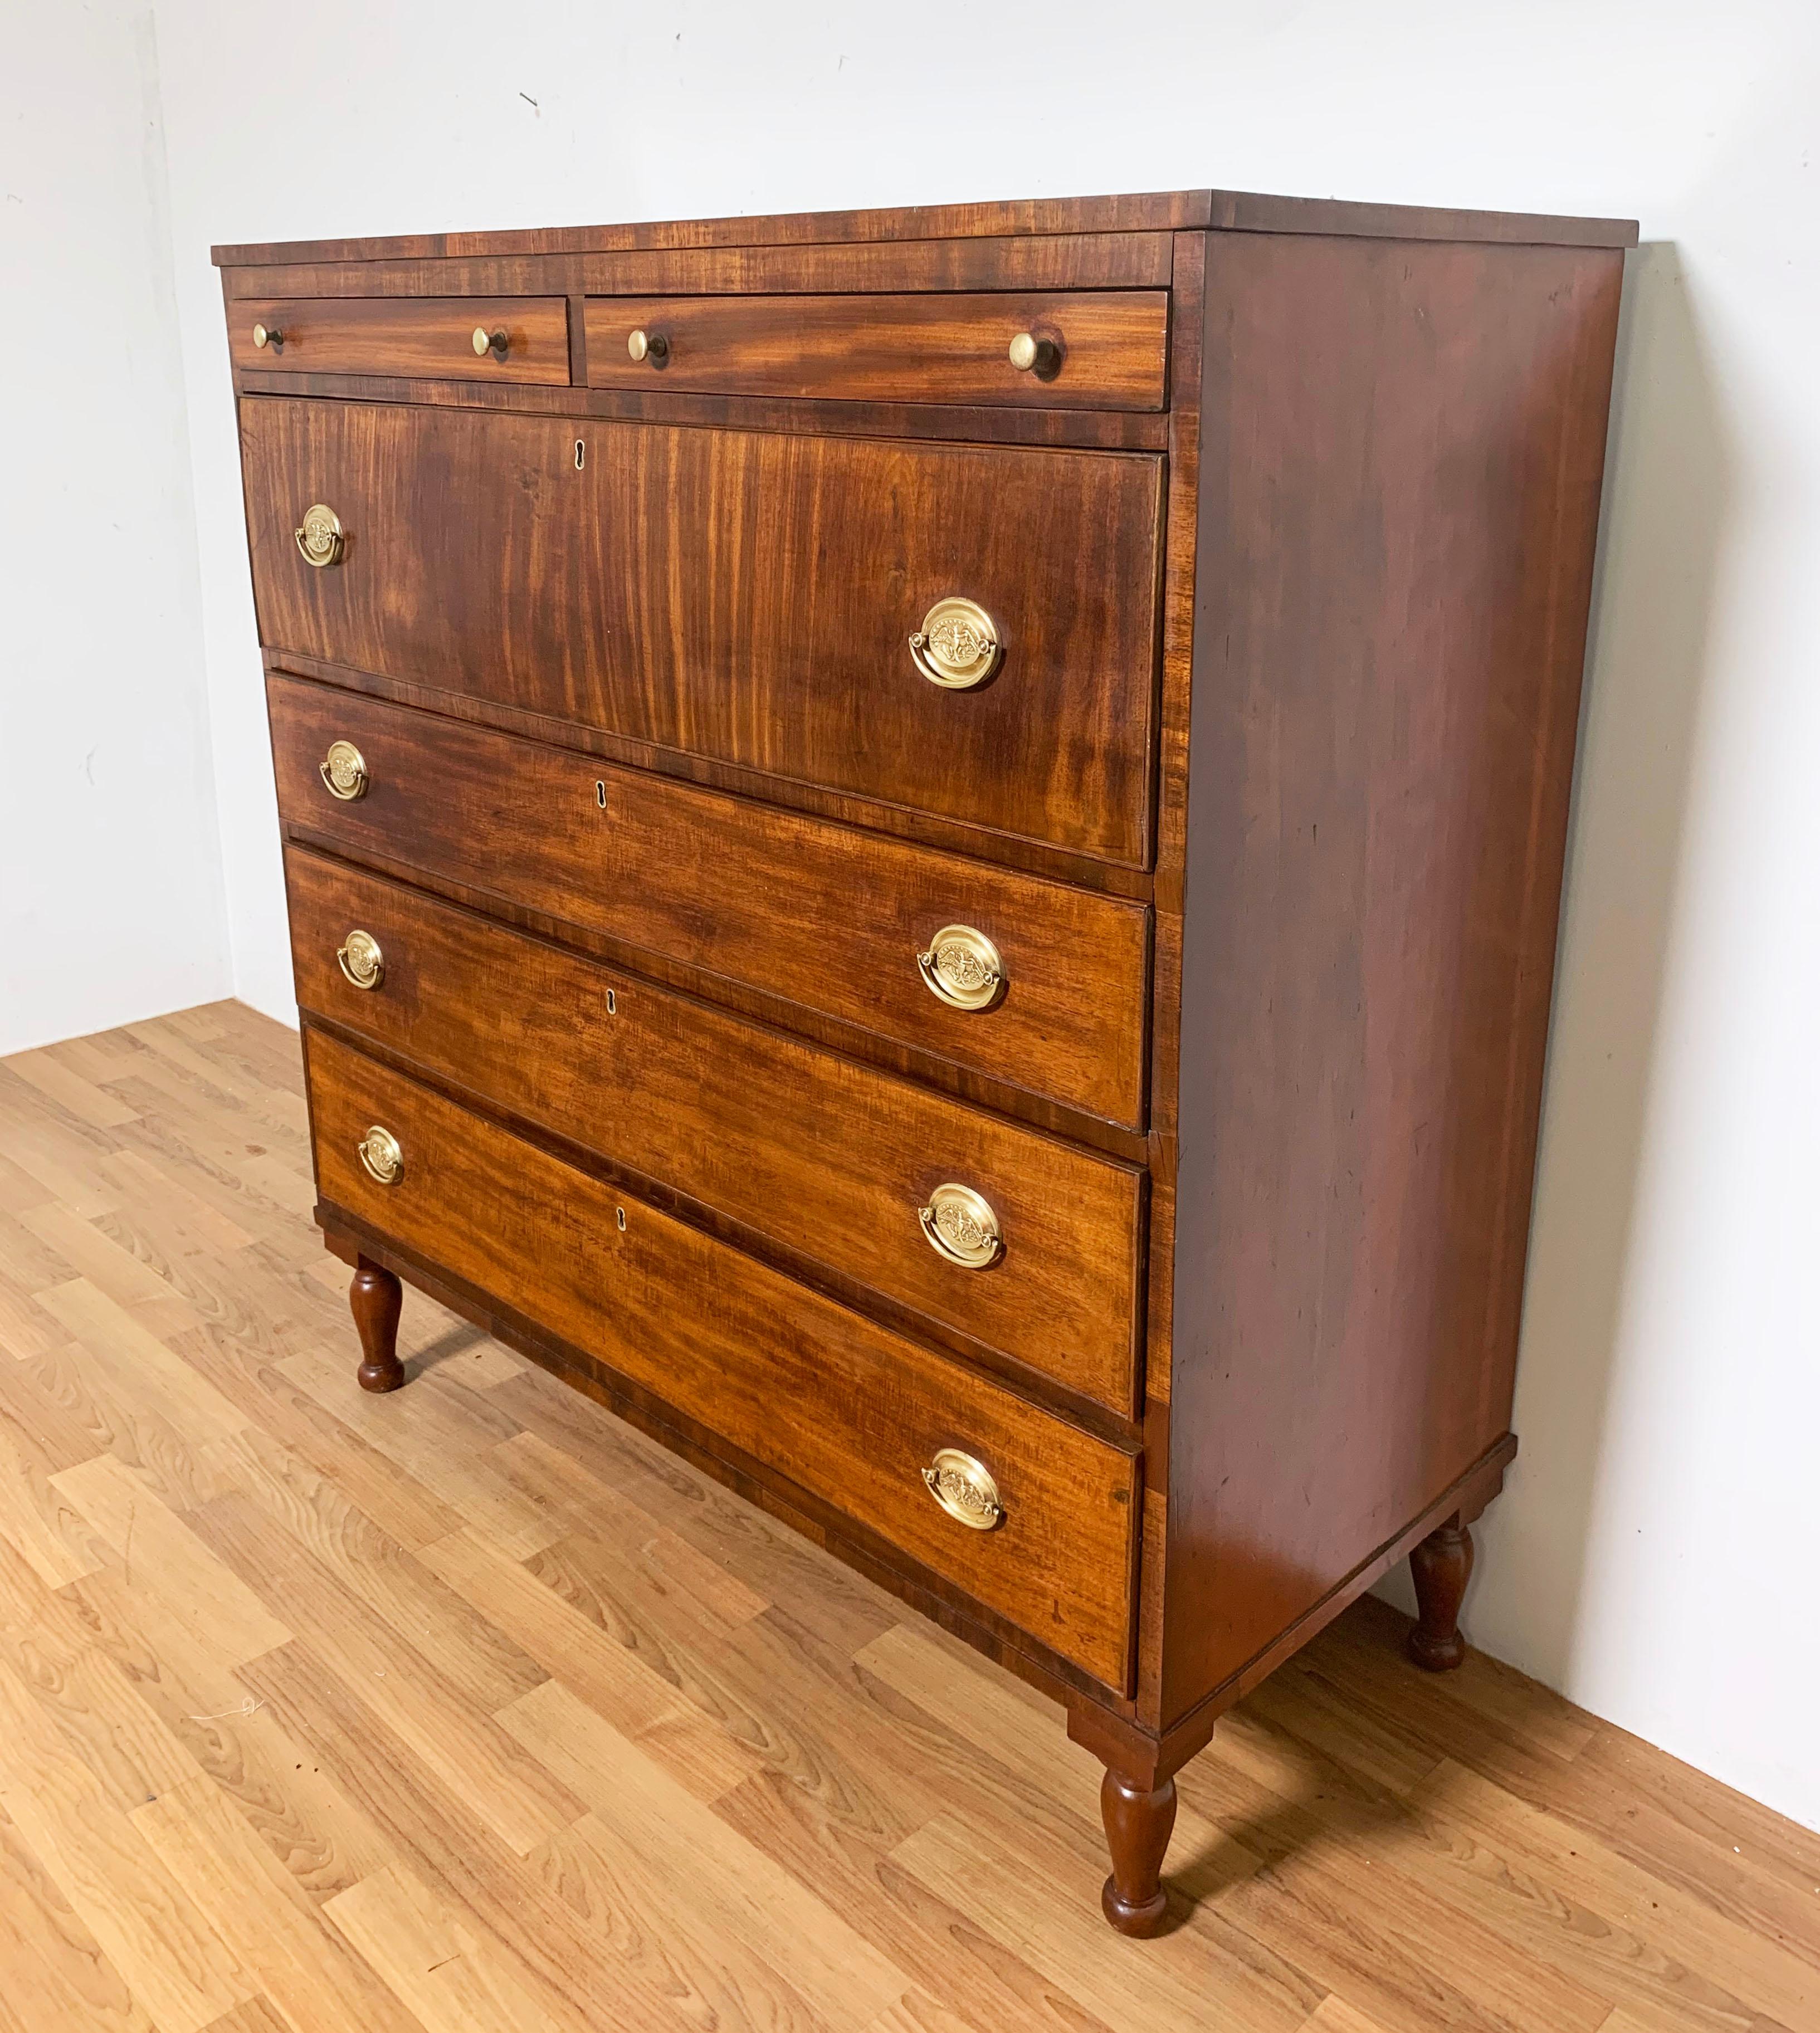 An attractive mahogany dressing chest of two drawers over four from the island of Nantucket. Features a deep center drawer for woolens and above three graduated drawers circa 1820s.